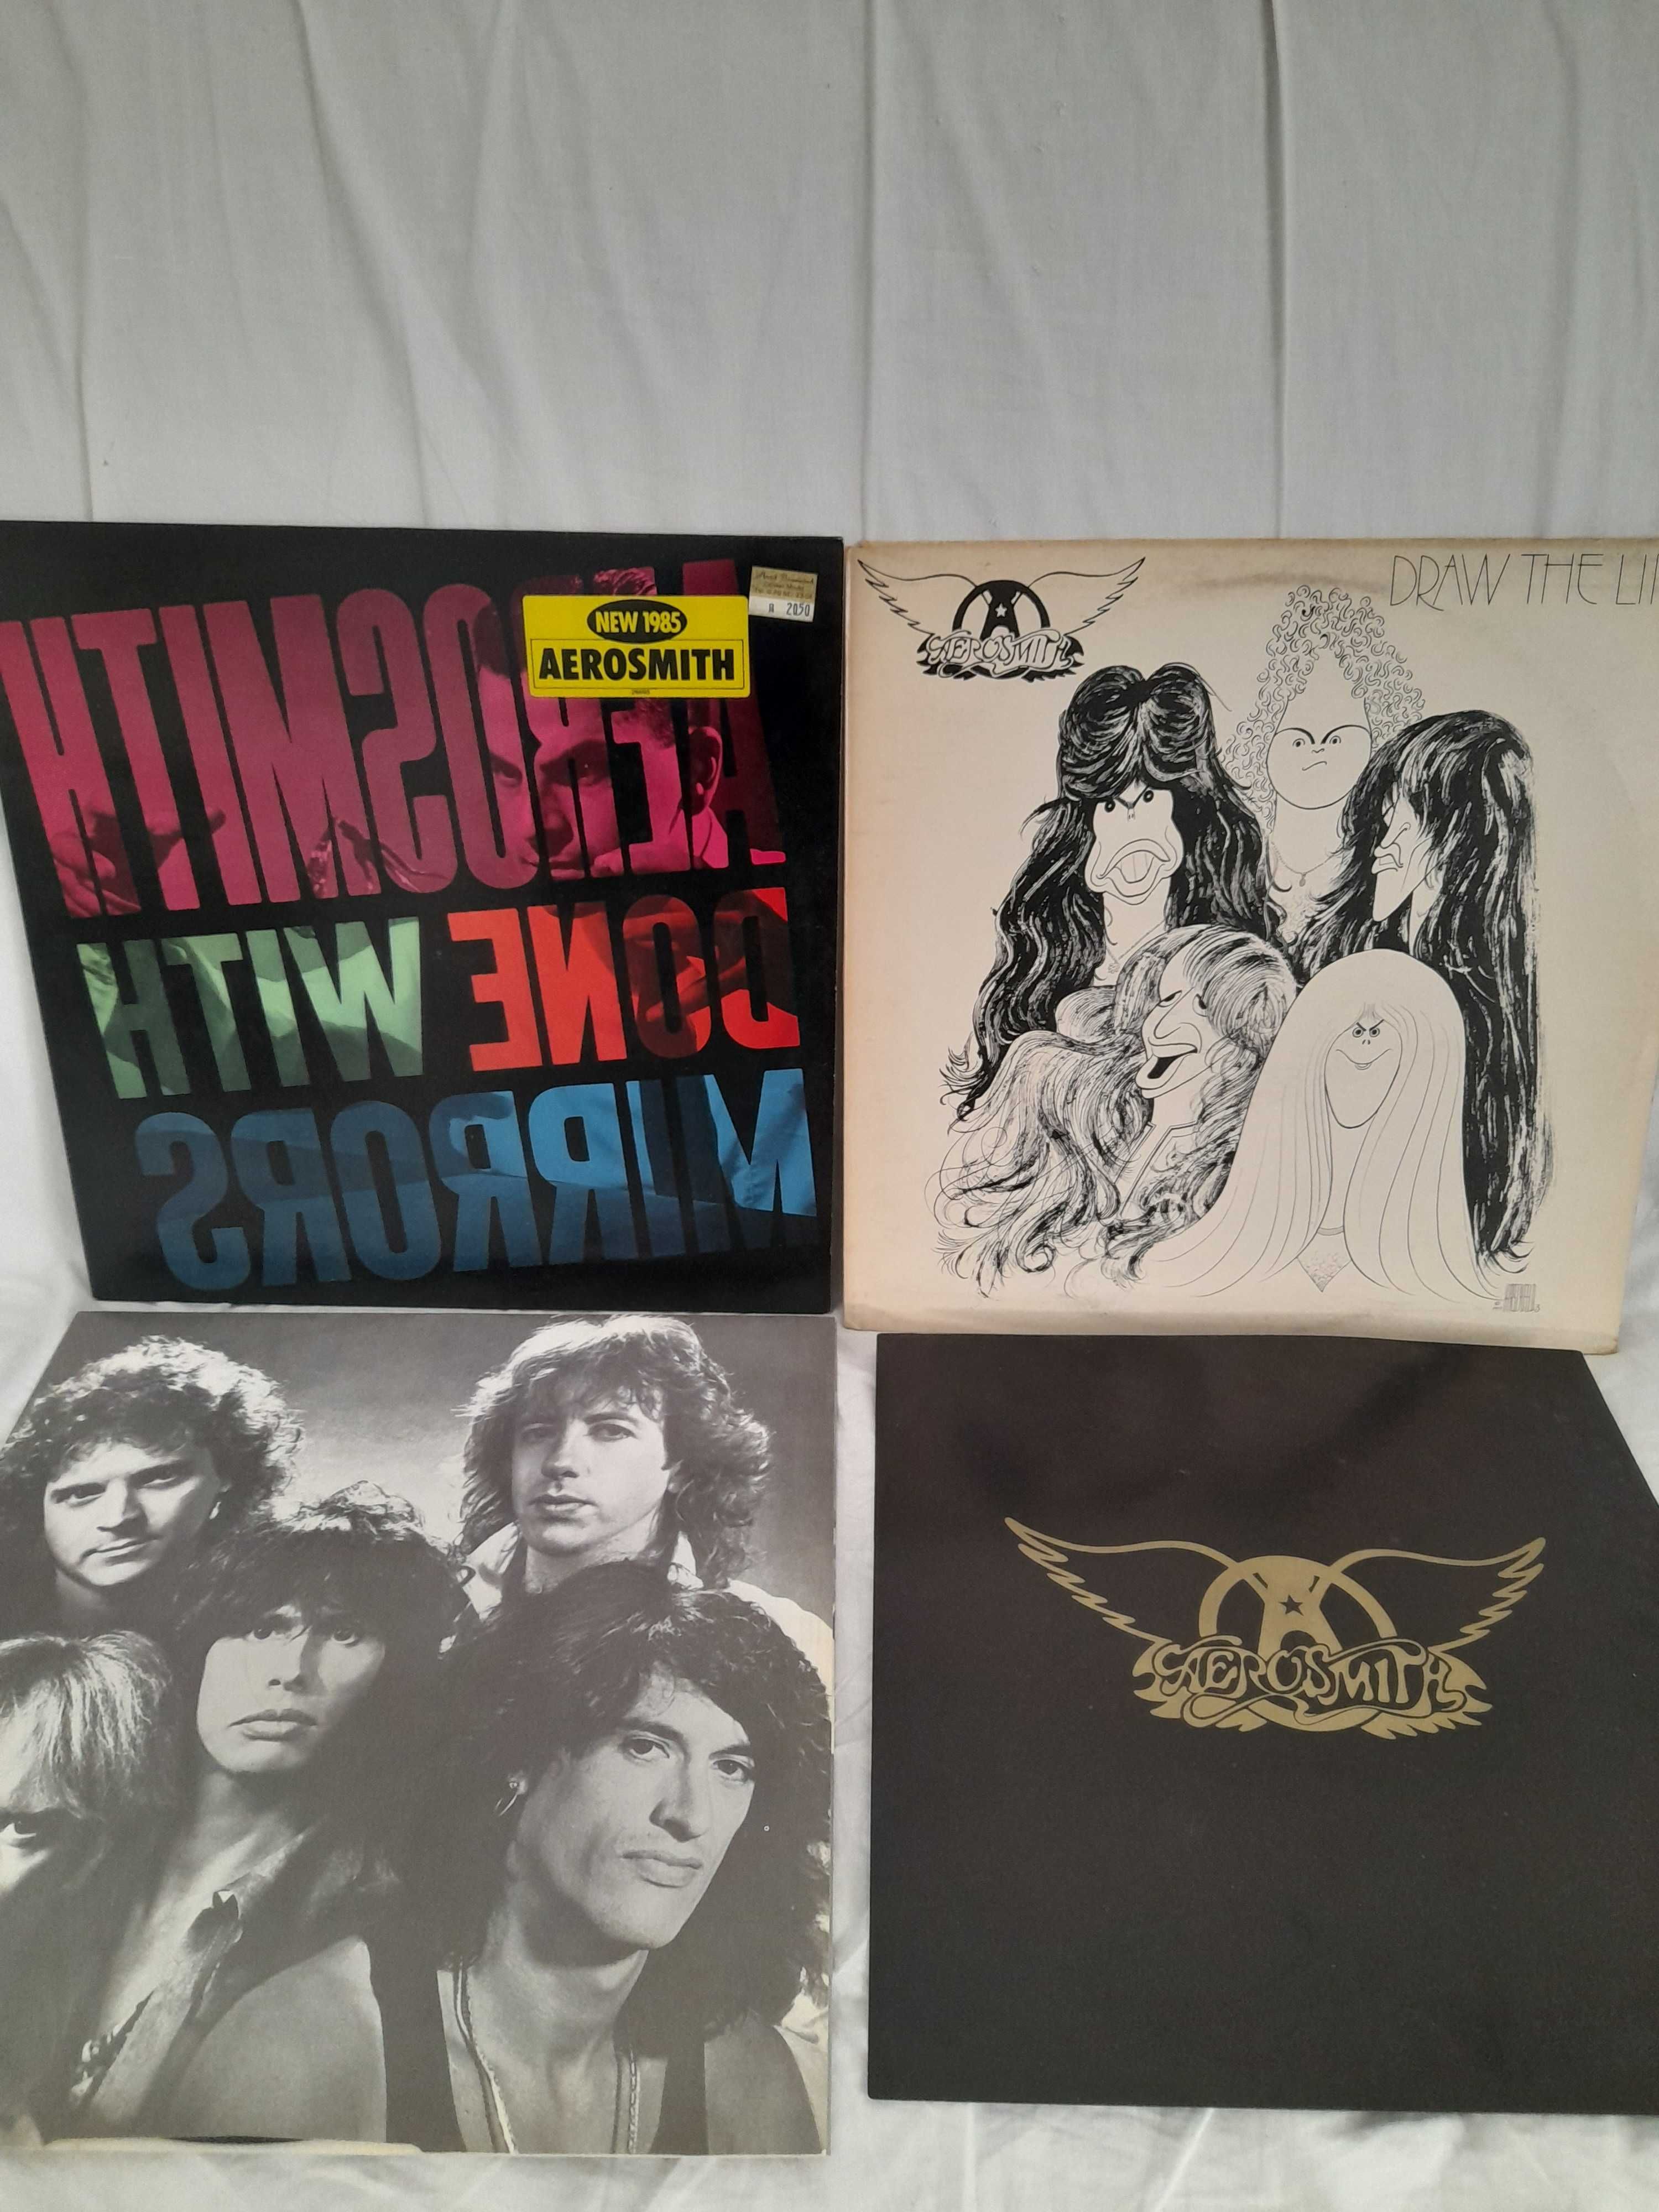 Lote 2 LPs Aerosmith Done With Mirrors Draw The Line